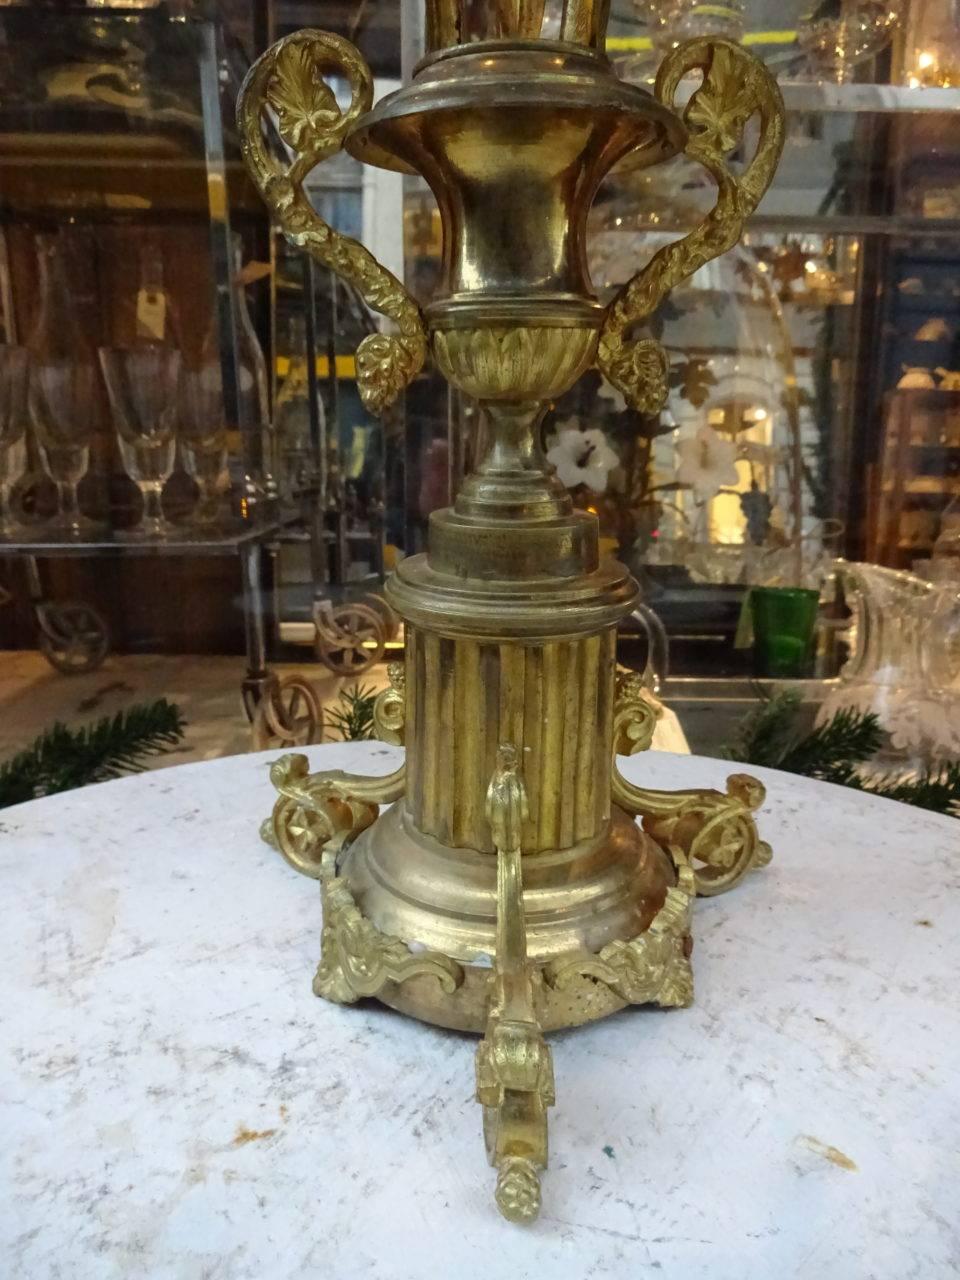 Gorgeous antique French church candlestick / candelabra in gilded bronze. Prettily decorated with white opaque glass lilies, and can hold 9 candles.